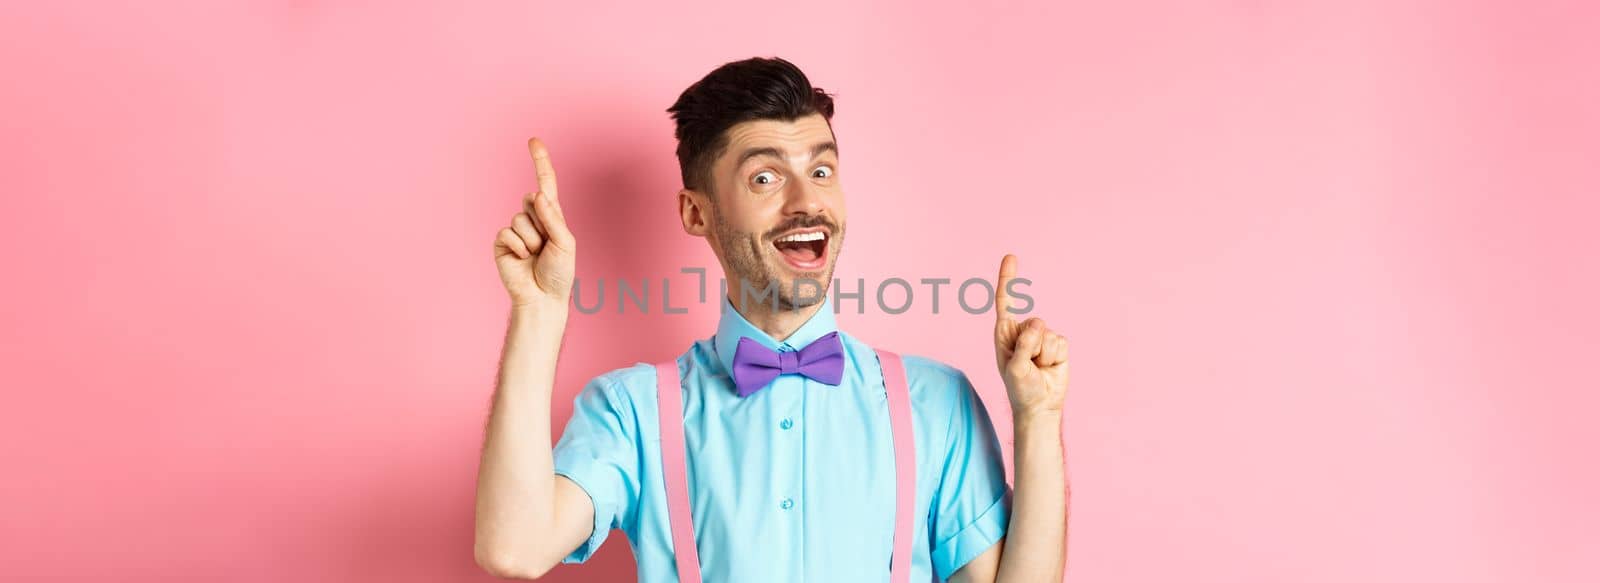 Cheerful guy with french moustache pitching an idea, dancing and raising fingers up, having solution, standing happy over pink background.